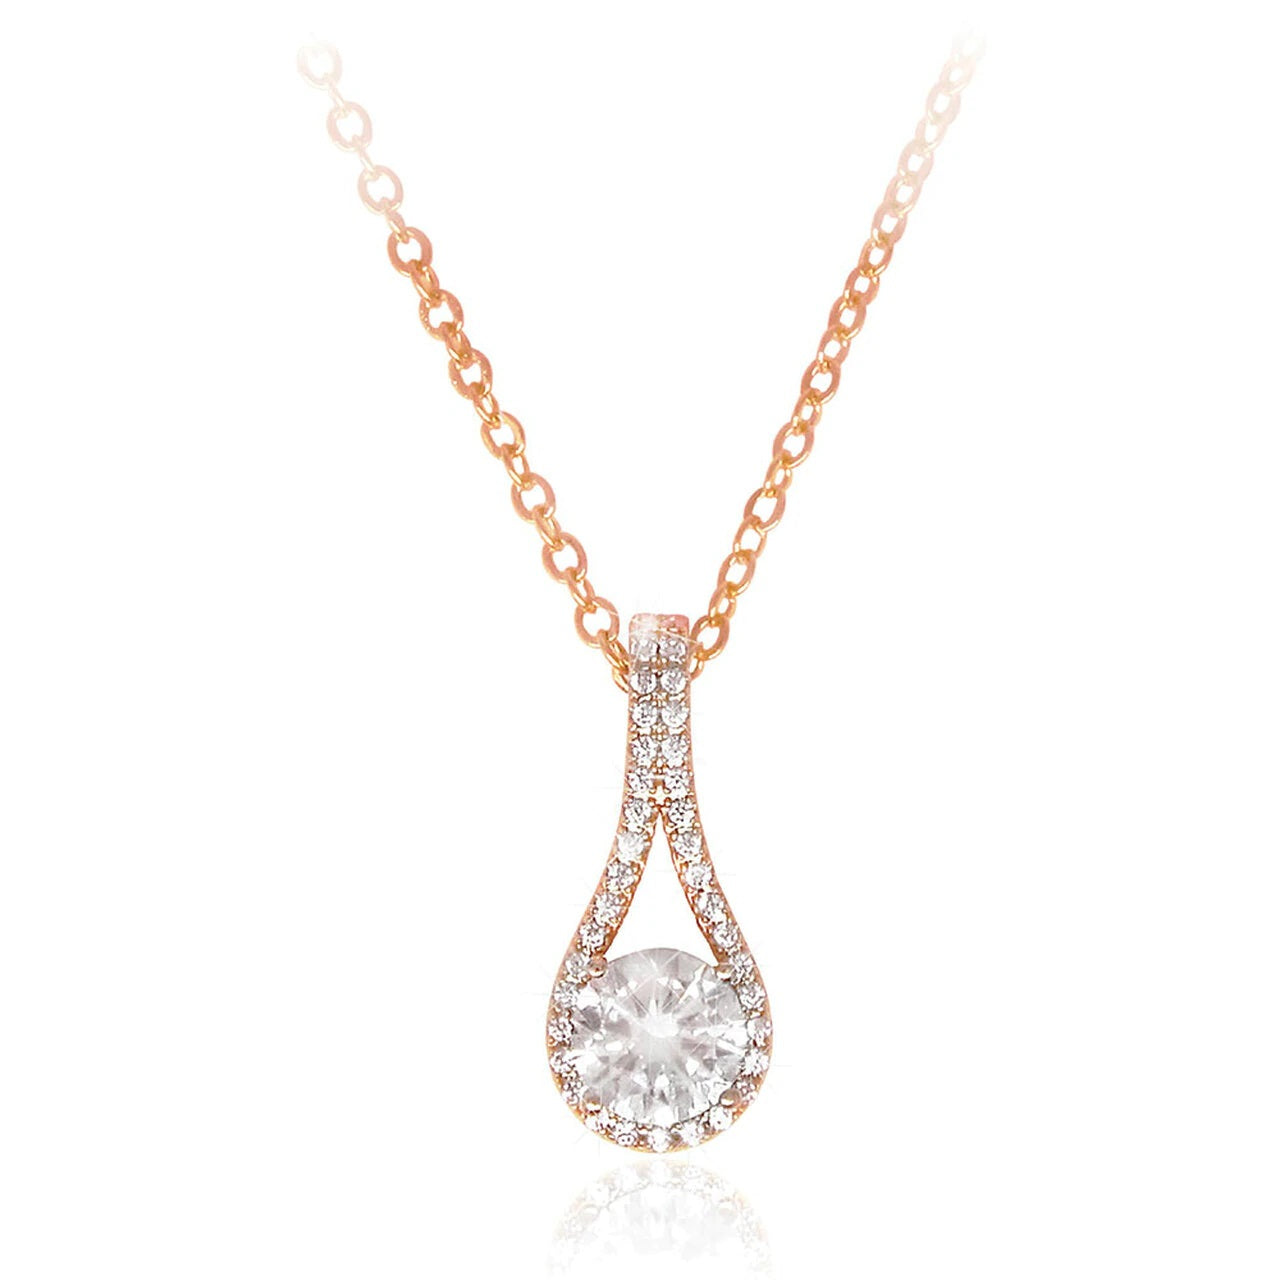 Tipperary Crystal Rose Gold Pendant With Round CZ In Hammock  Fashioned in precious rose gold, this elegant pendant features an elongated open tear drop shaped frame lined with exquisite shimmering round clear crystals. Anchoring the design is a large round cut crystal.